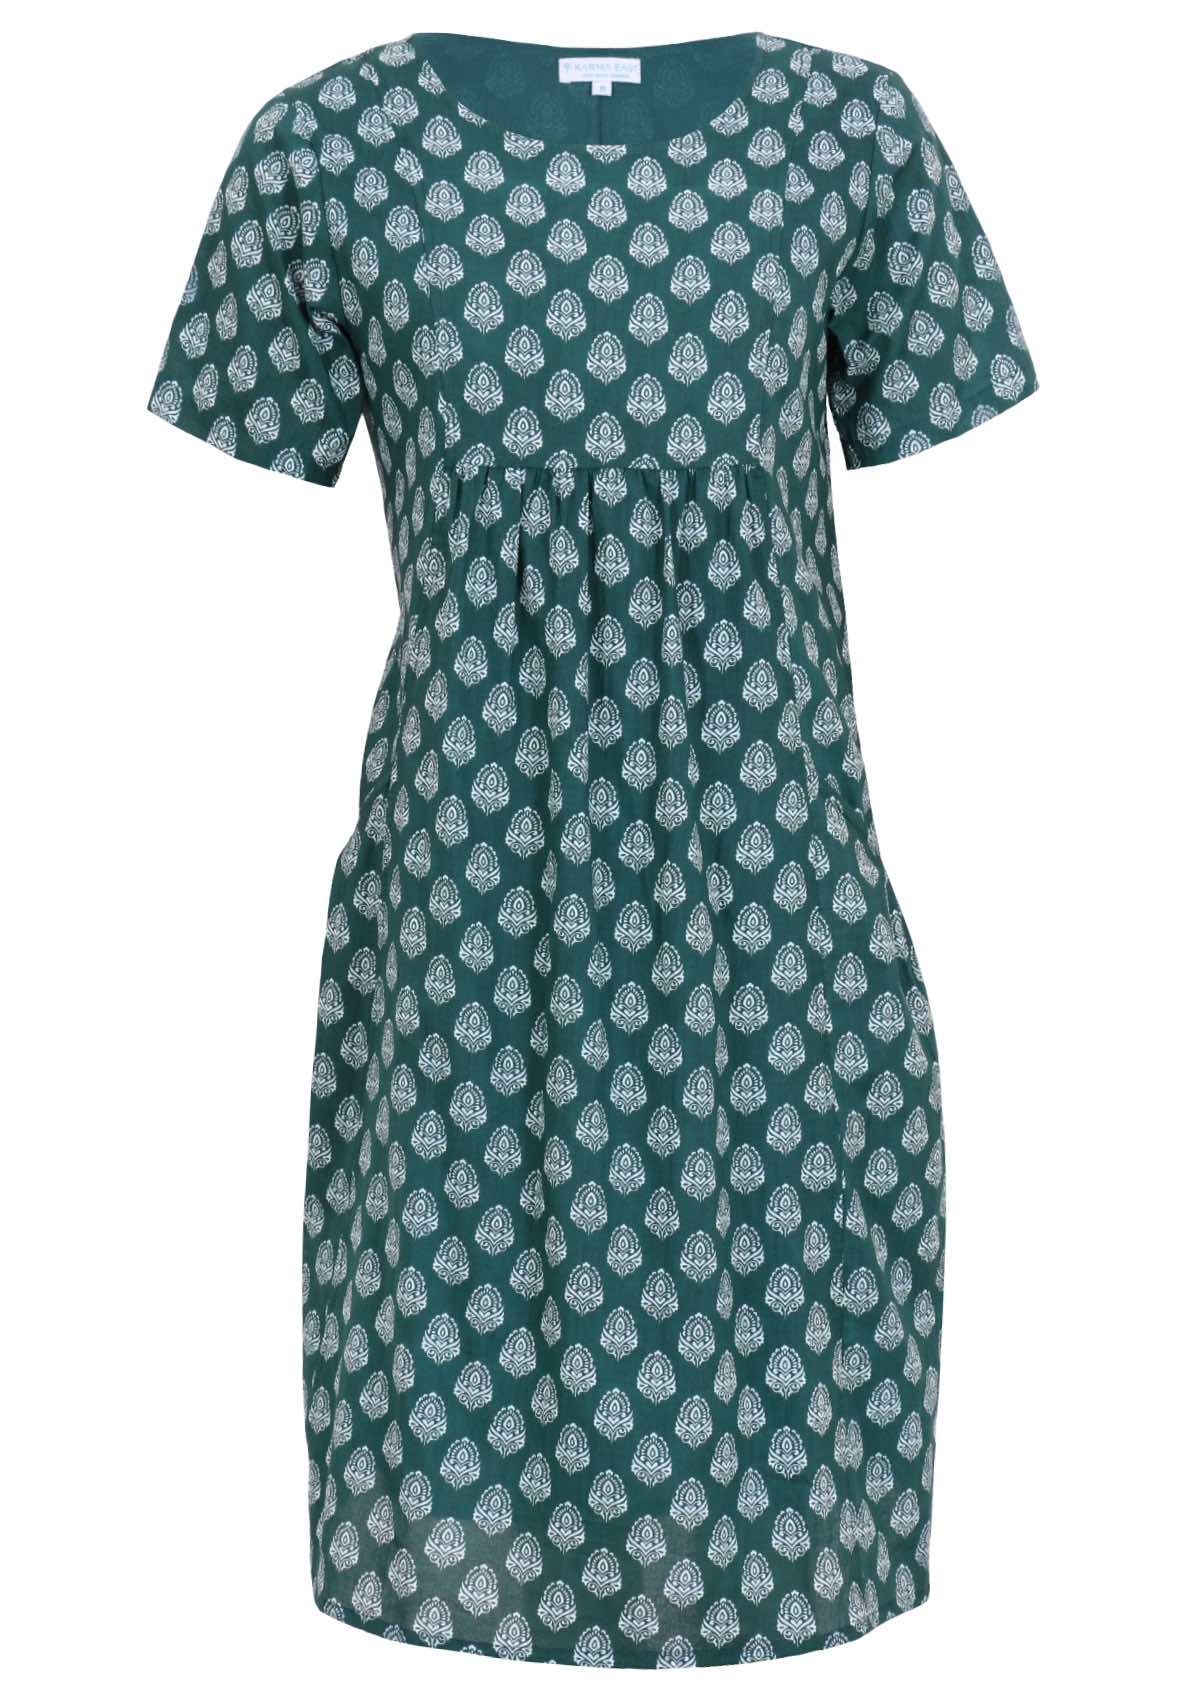 Green base with white floral pendant cotton dress 